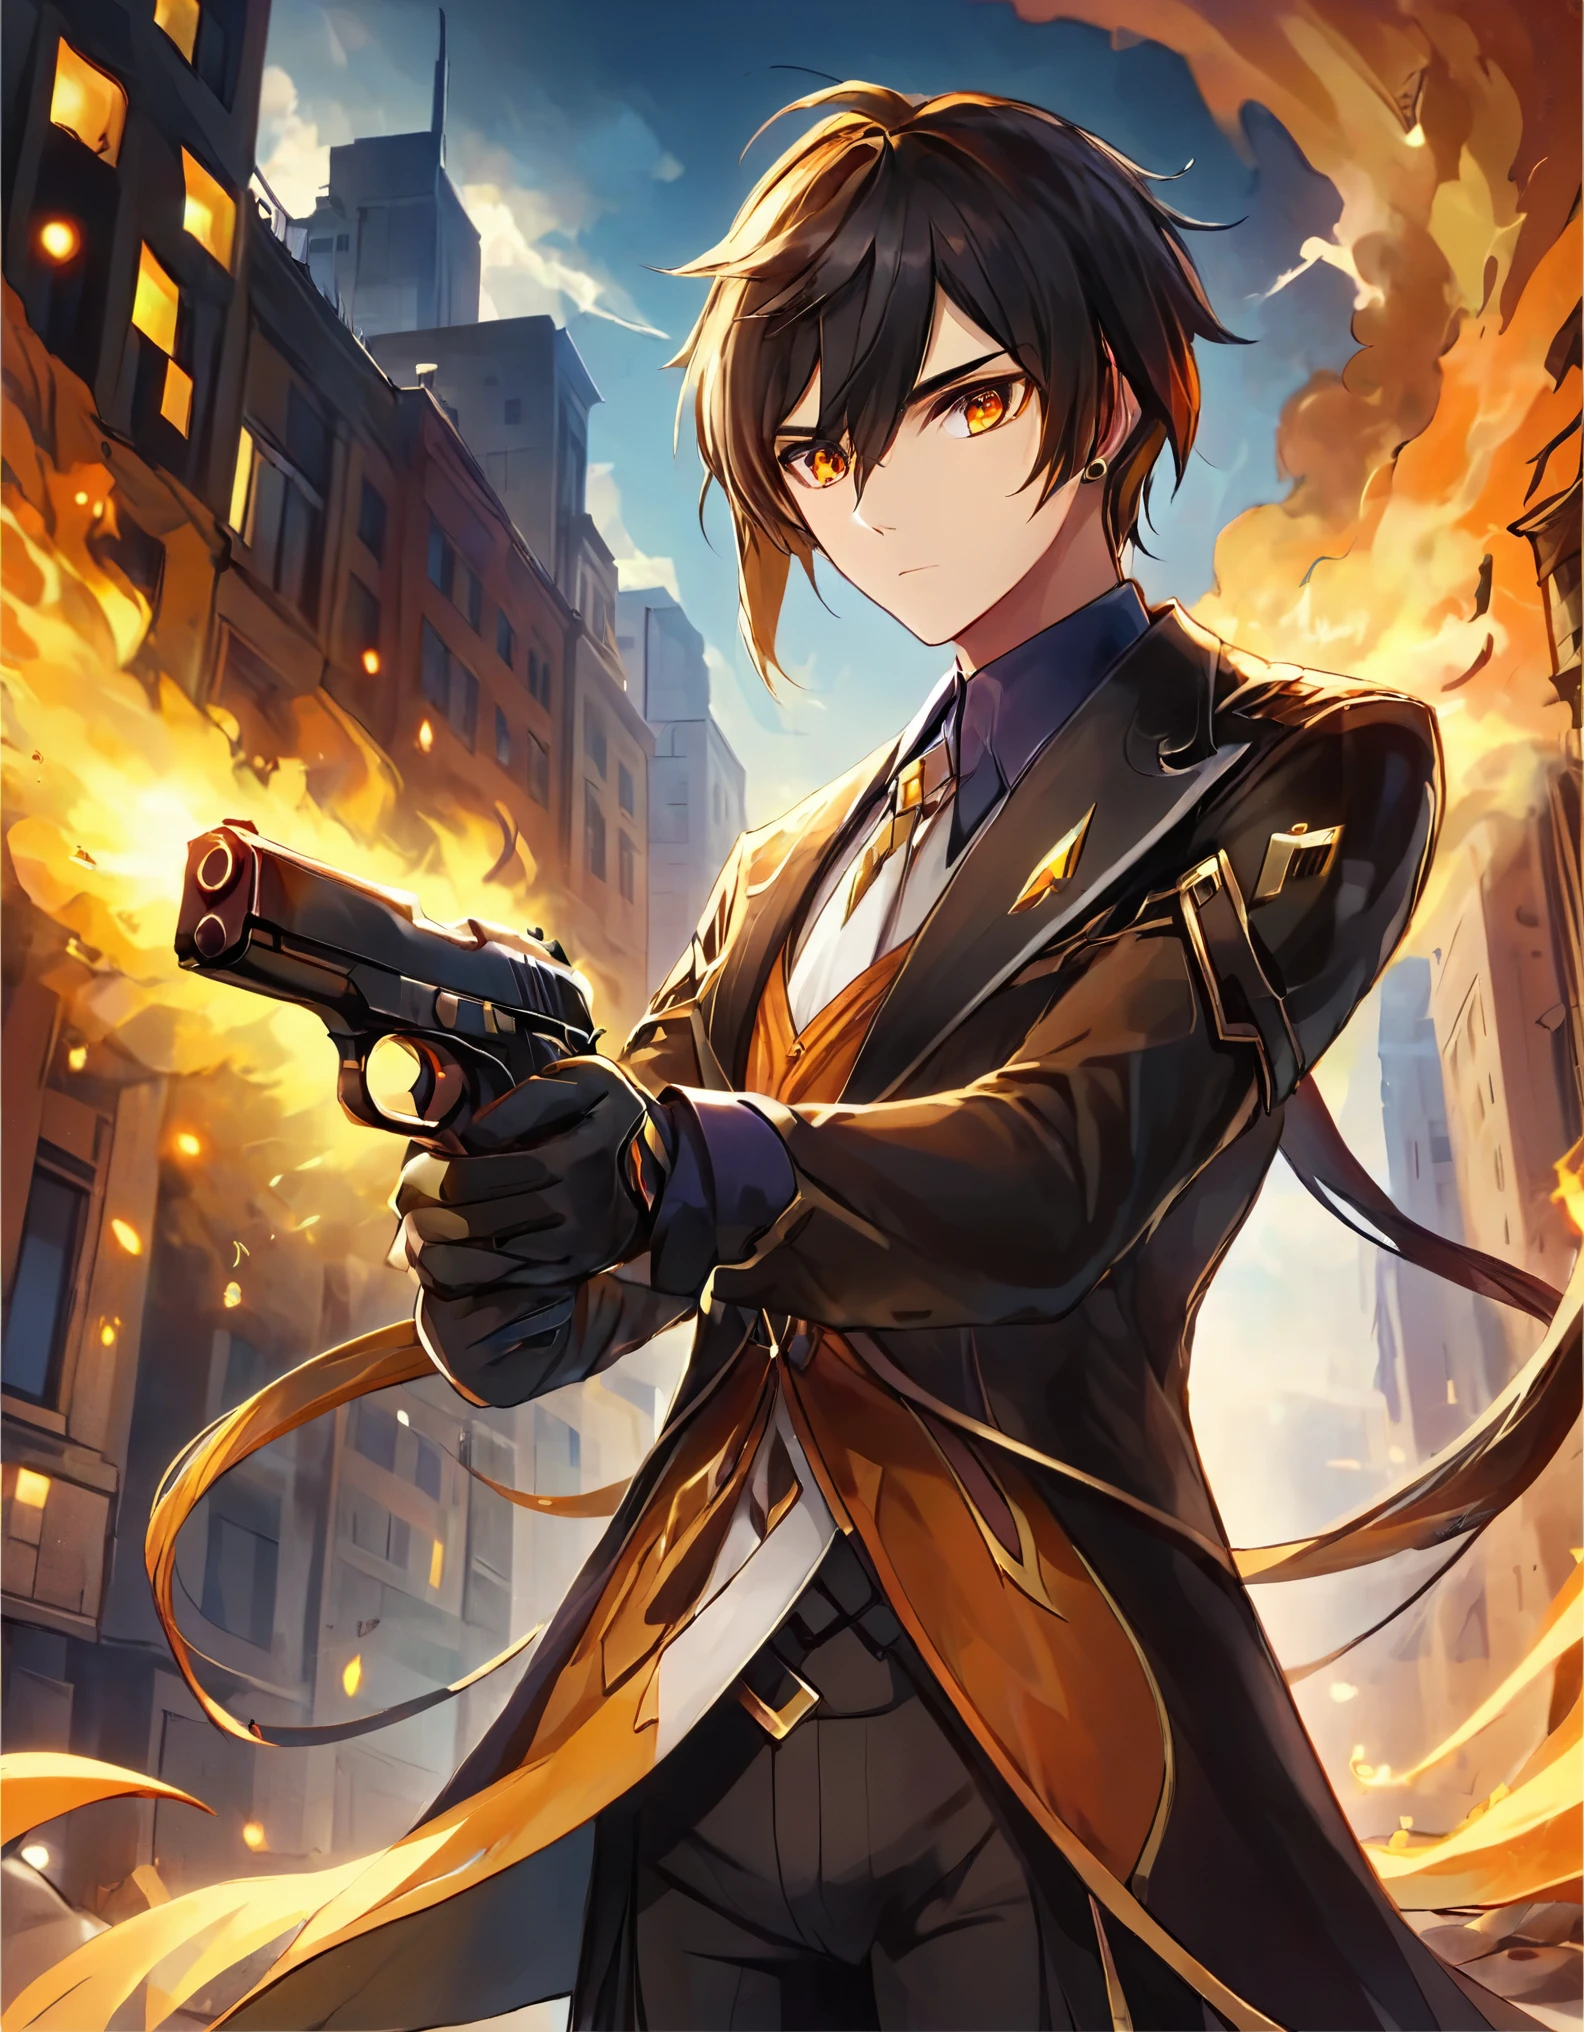 (better lighting, high contrast, sharp details), (a person:1.2+male) gangster, black suit and tie, White shirt, Black pants, polished black shoes, standing, dynamic action pose, holding two guns, Beretta 92, flash, Bullet shells, gun smoke, bullet holes, Pointing at the viewer, black fur, By the chestnut, medium hair, groomed hair, 28 years, intense action, Brooklyn, high end apartment backdrop, vivid colors, high saturation, dramatic shadows.